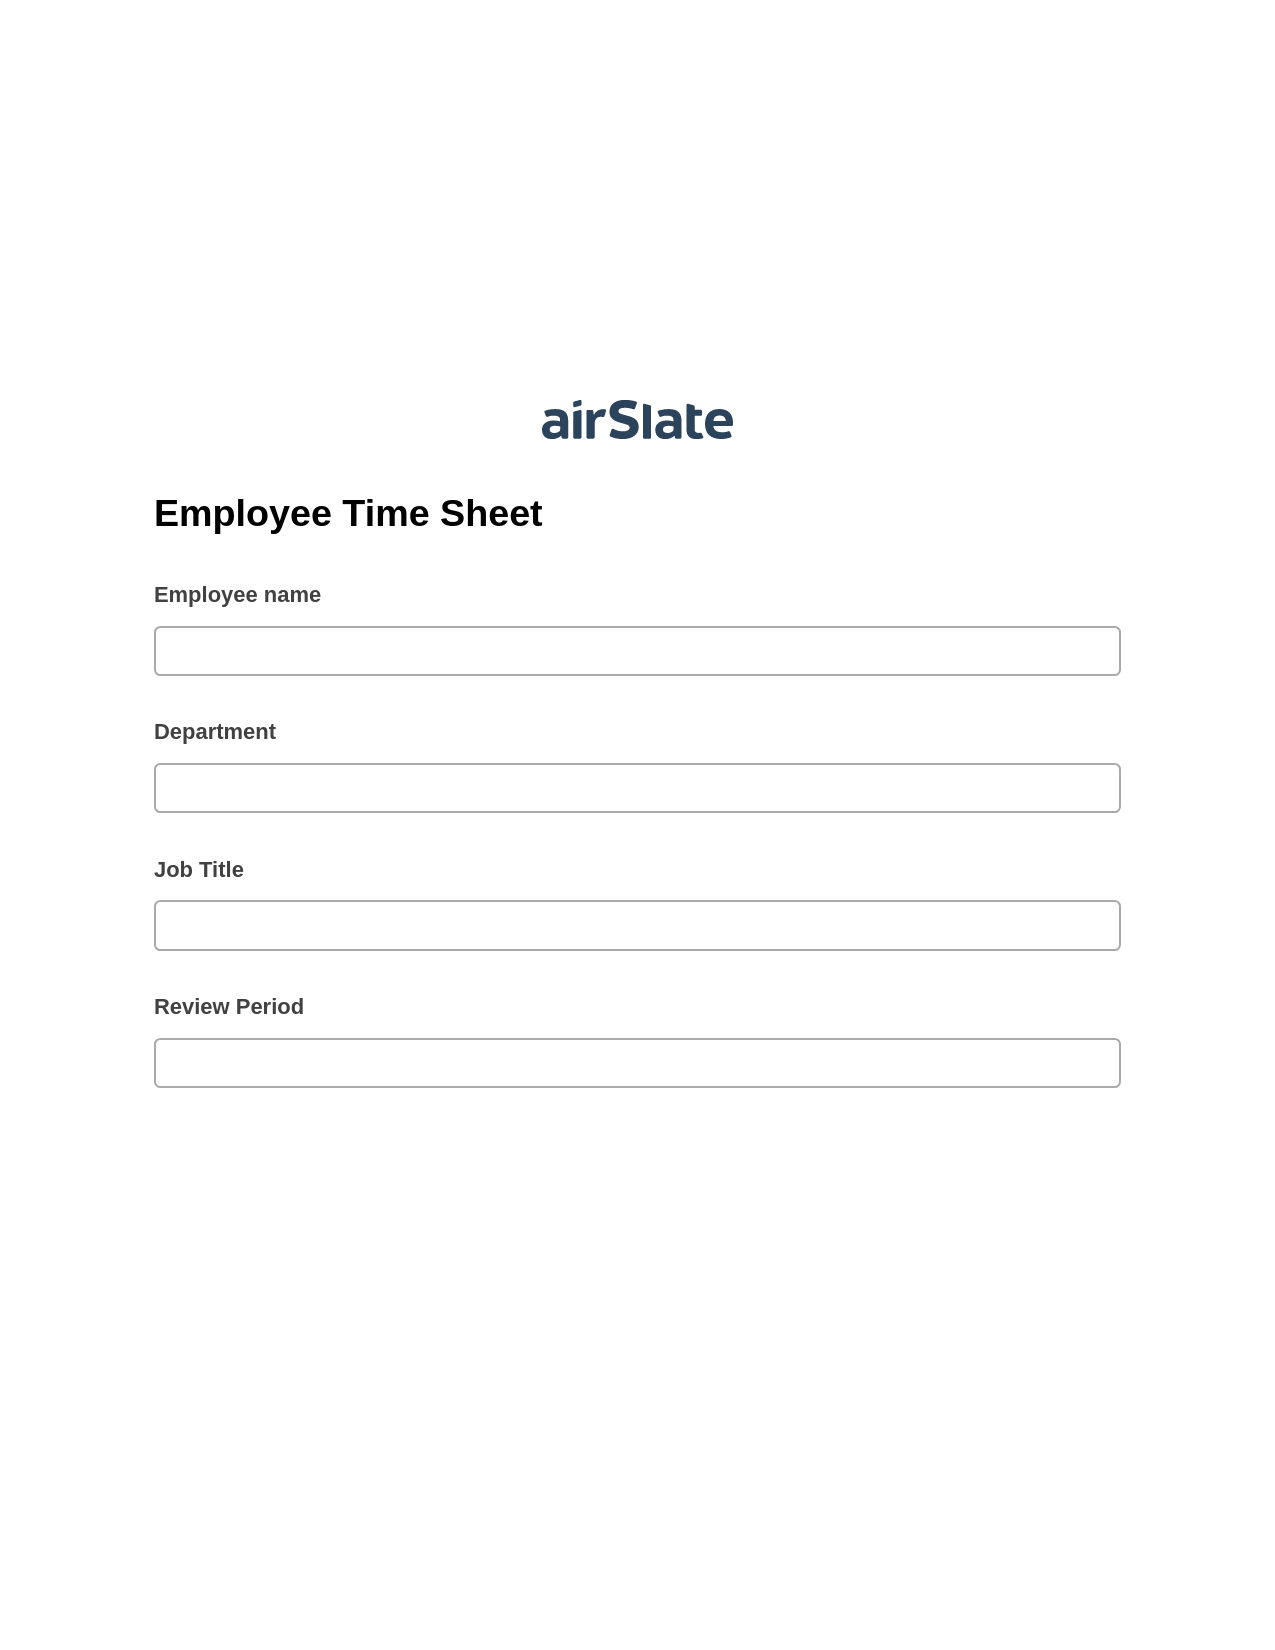 Multirole Employee Time Sheet Pre-fill from MS Dynamics 365 Records, Email Notification Bot, Export to Salesforce Record Bot